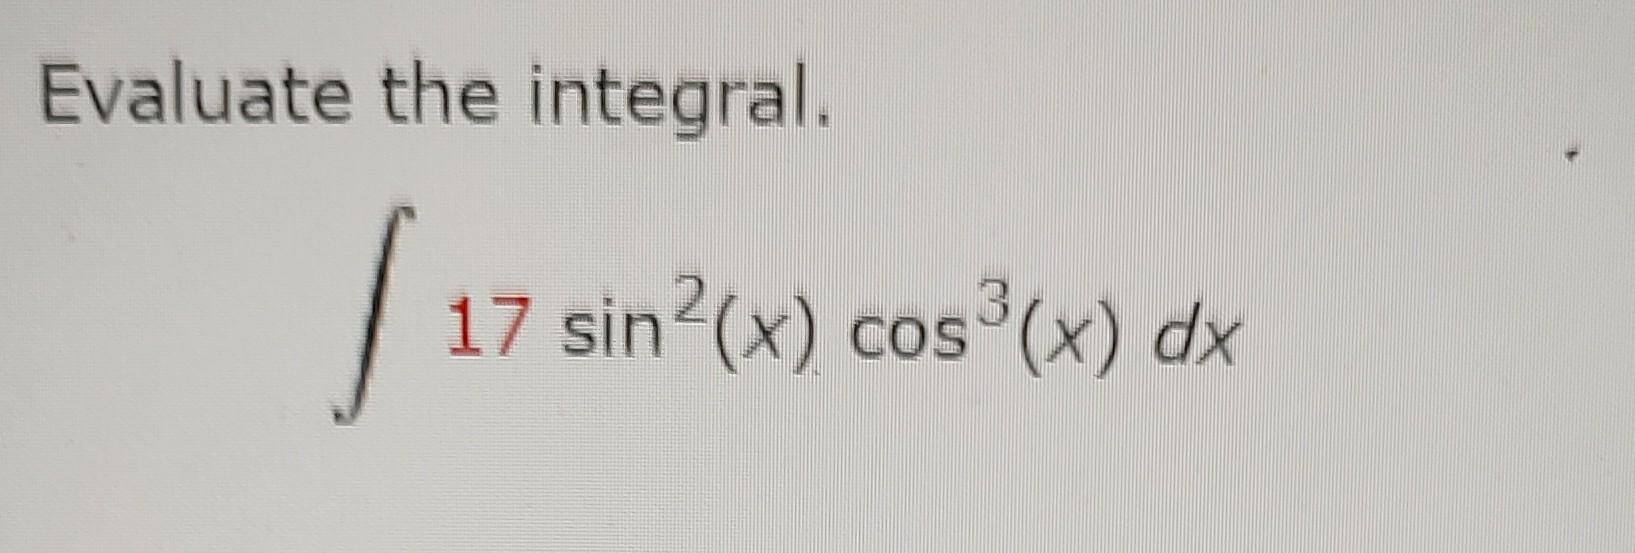 Evaluate the integral.
\[
\int 17 \sin ^{2}(x) \cos ^{3}(x) d x
\]